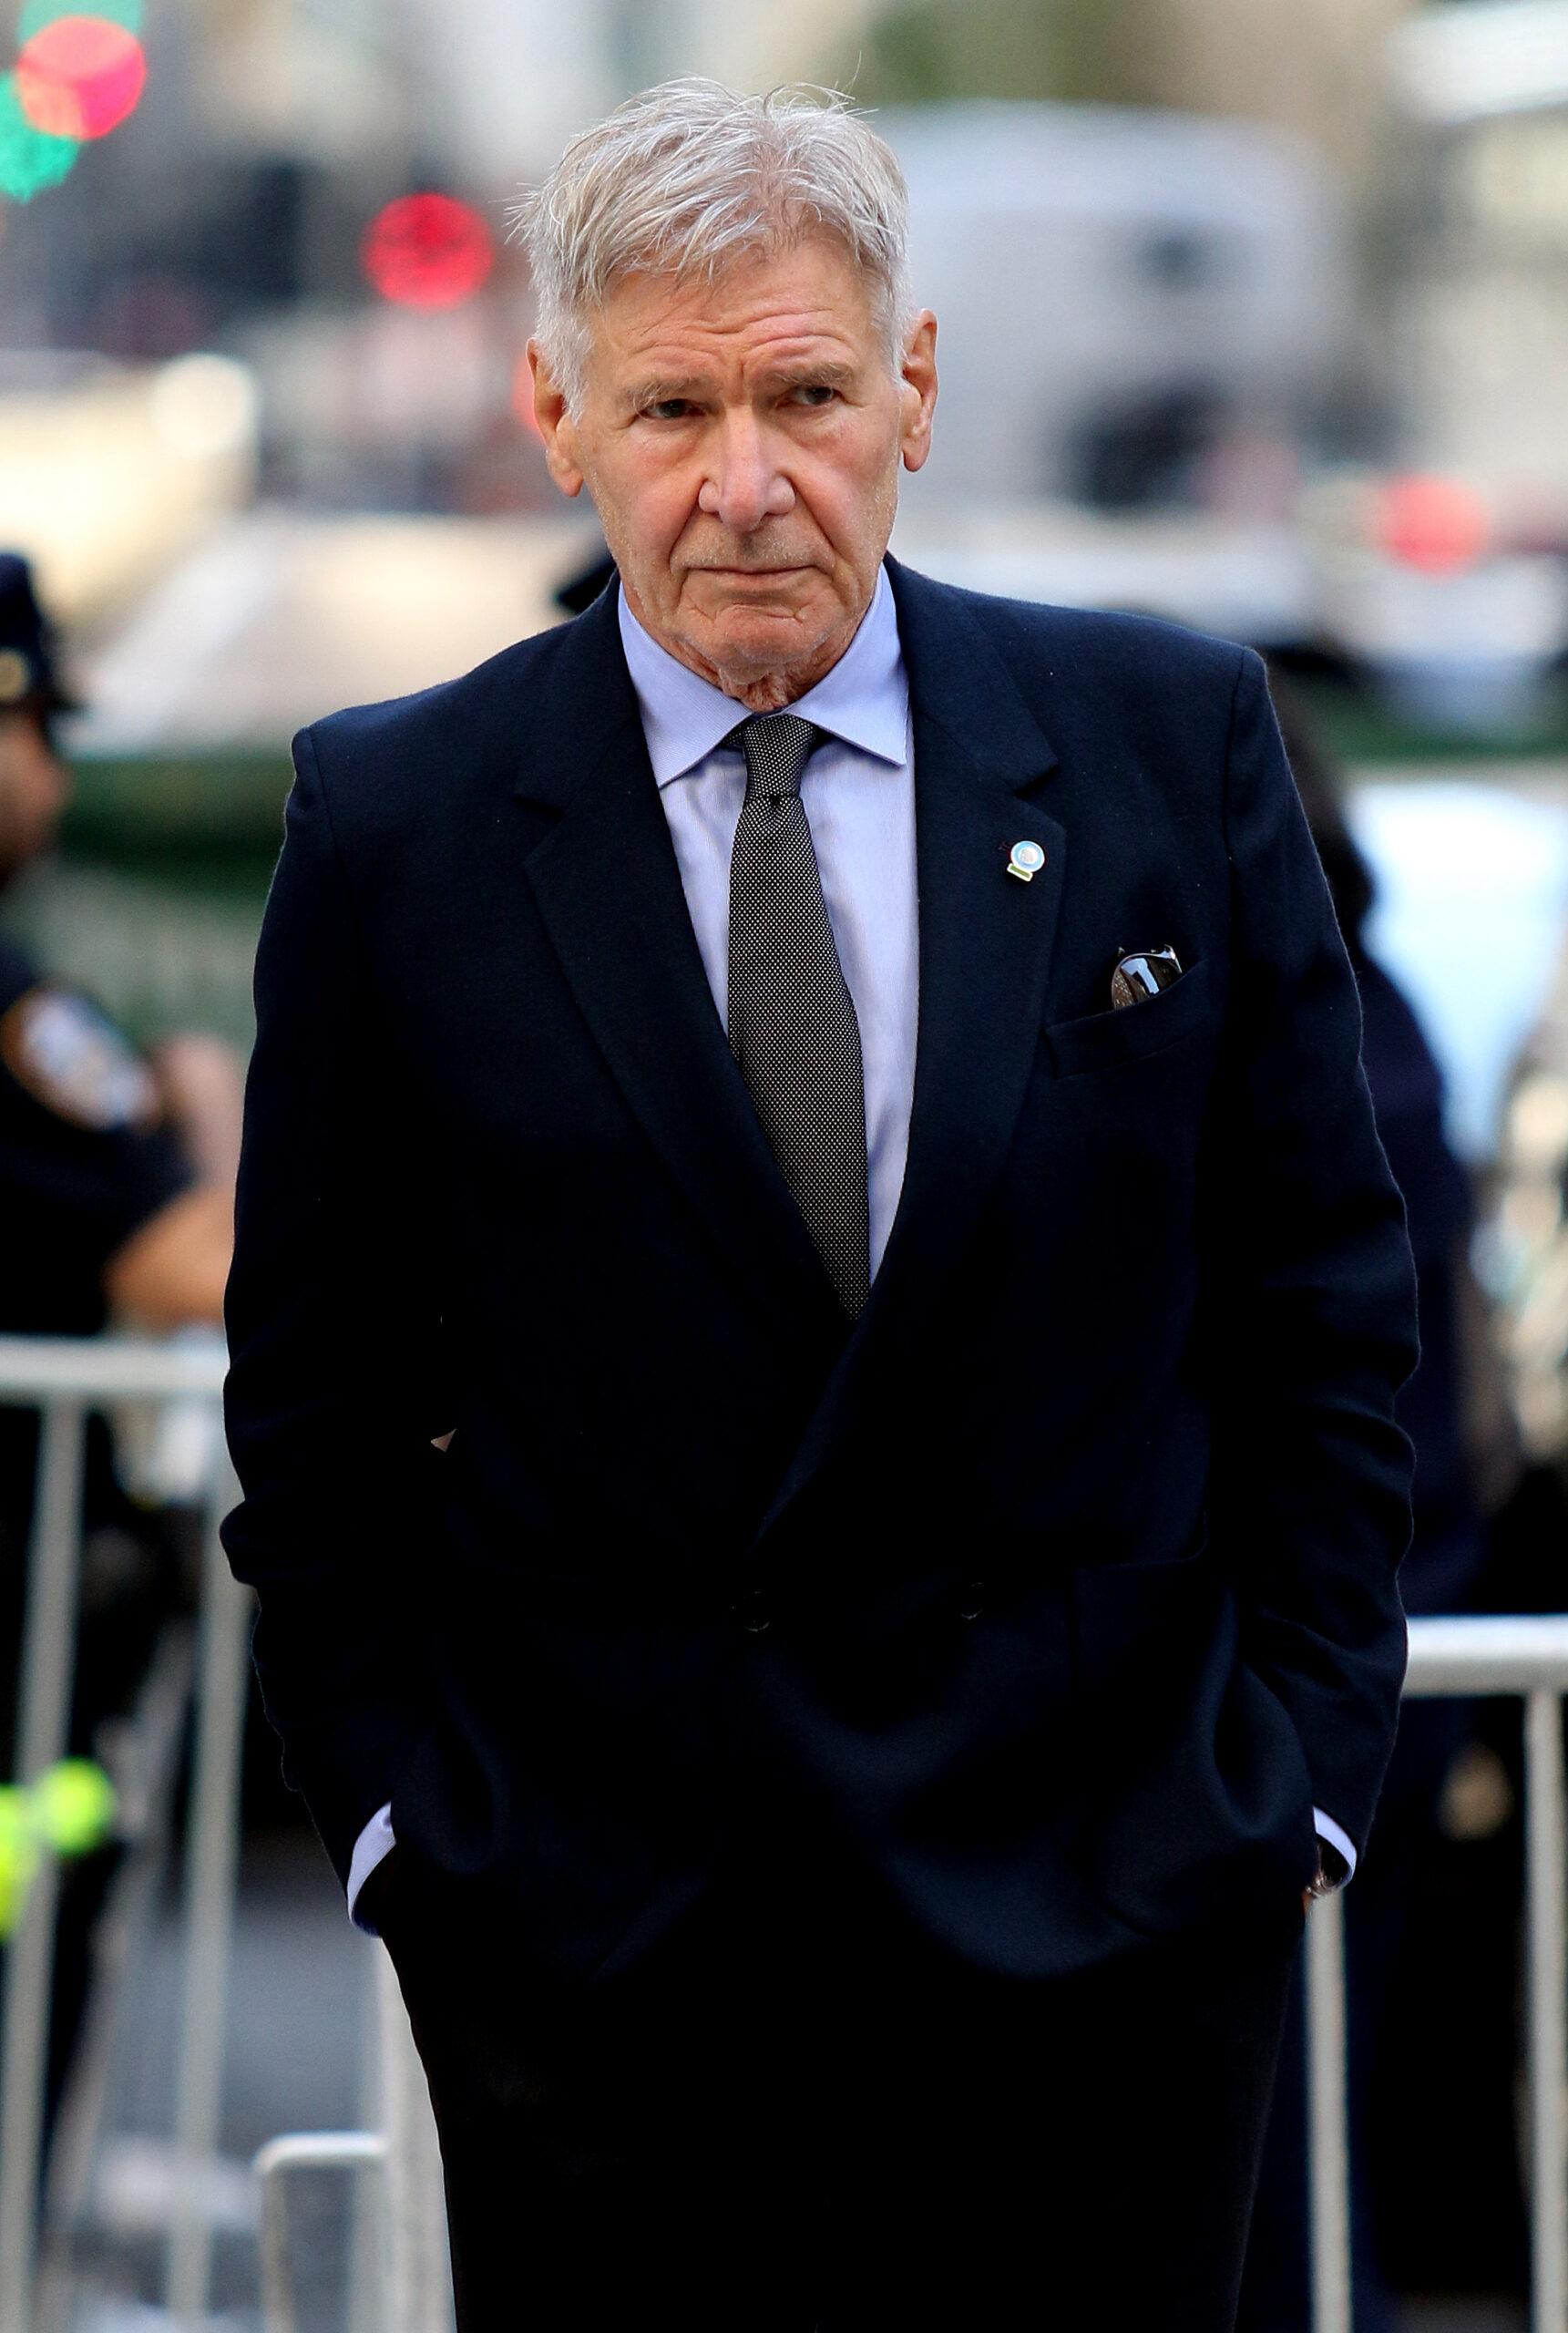 Harrison Ford is denied entry by Homeland Security Police during gridlock streets for UN General Assembly in NYC